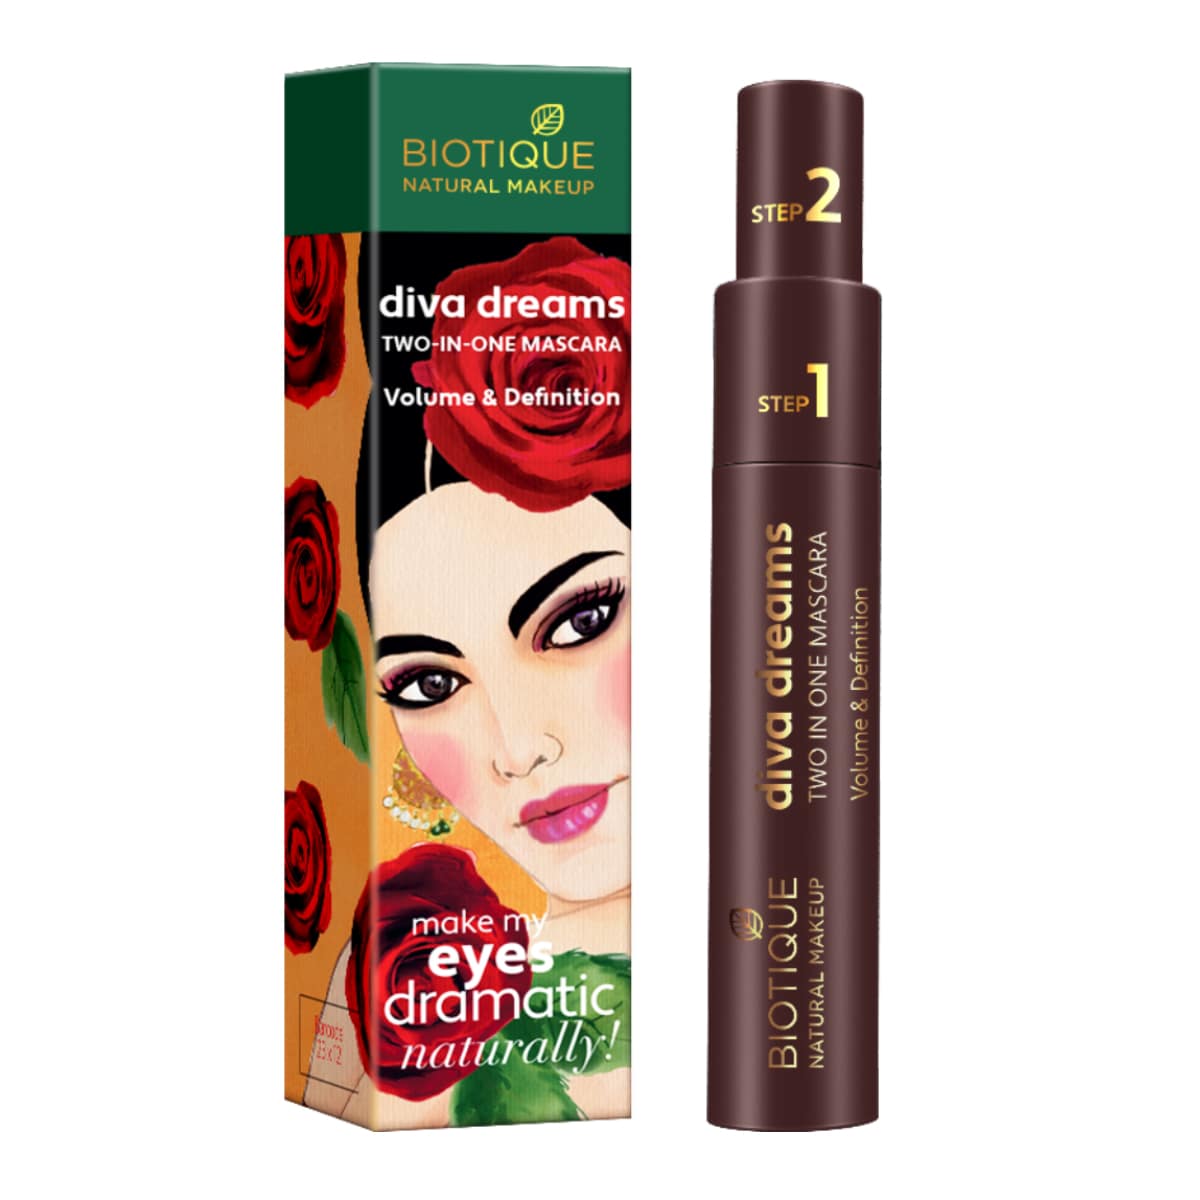 Biotique Natural Makeup Diva Dreams Two In One Mascara, 9ml